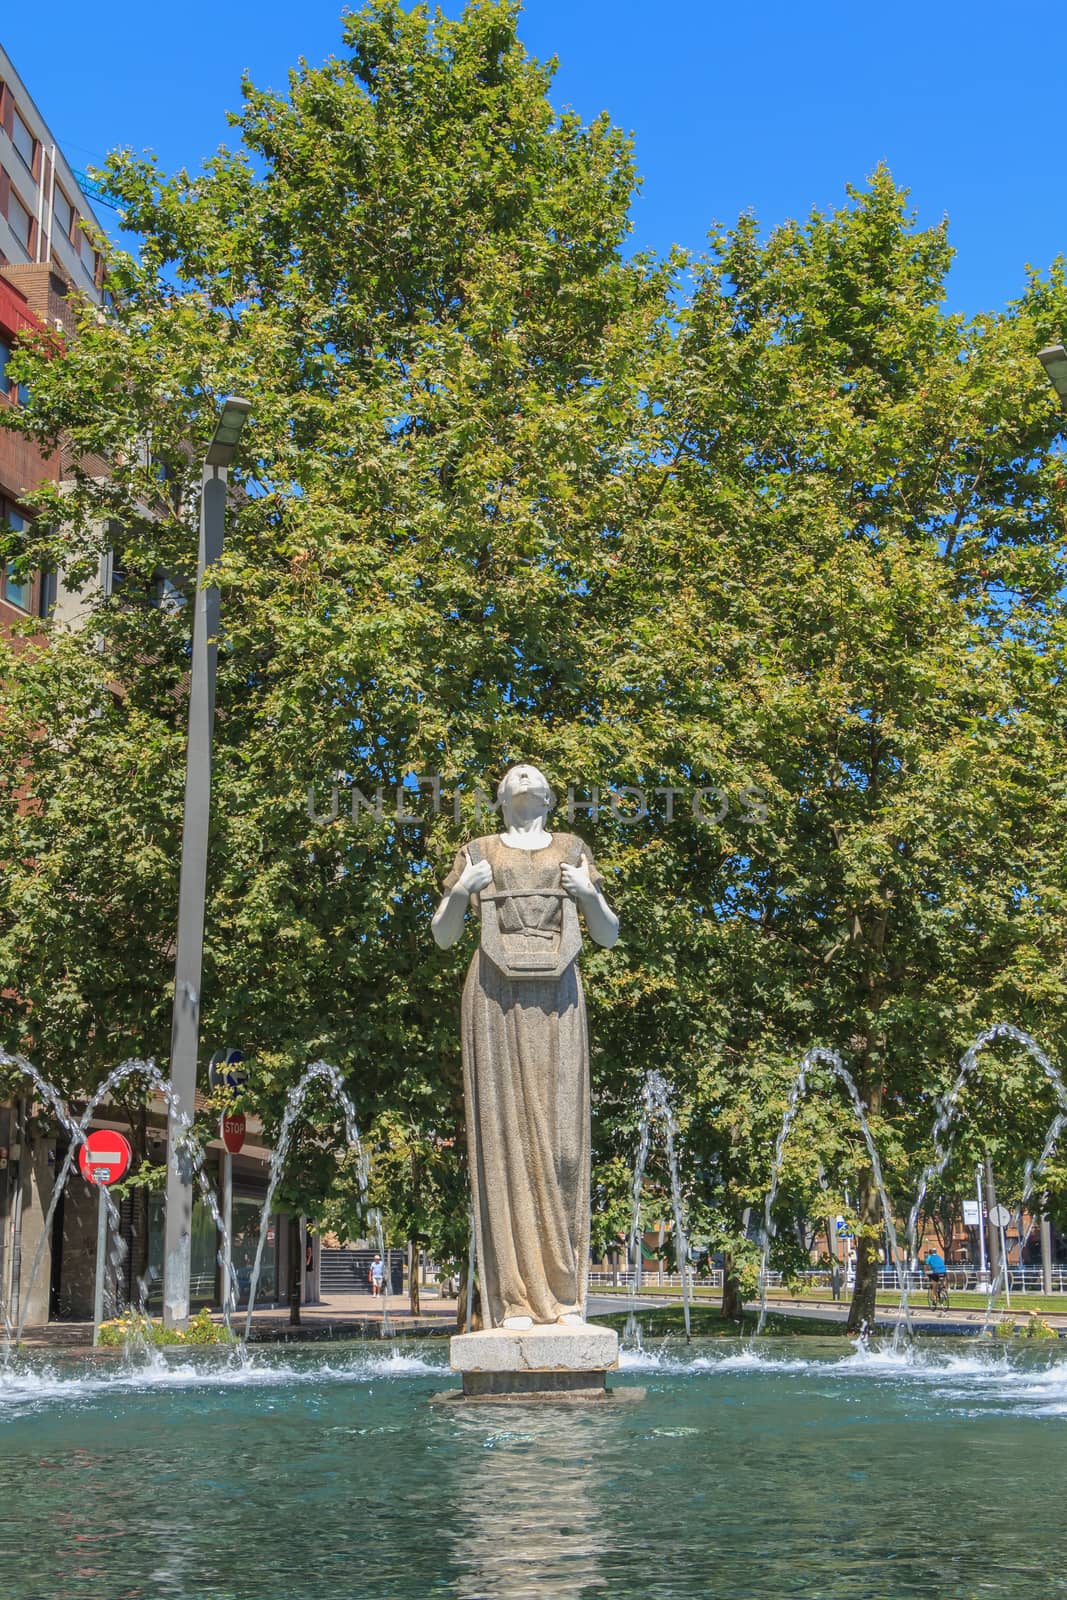 Bilbao, Spain - July 19, 2016 : statue of Melpomene, in Greek mythology the muse of singing, carved by Enrique Barros, under the sun on a summer day